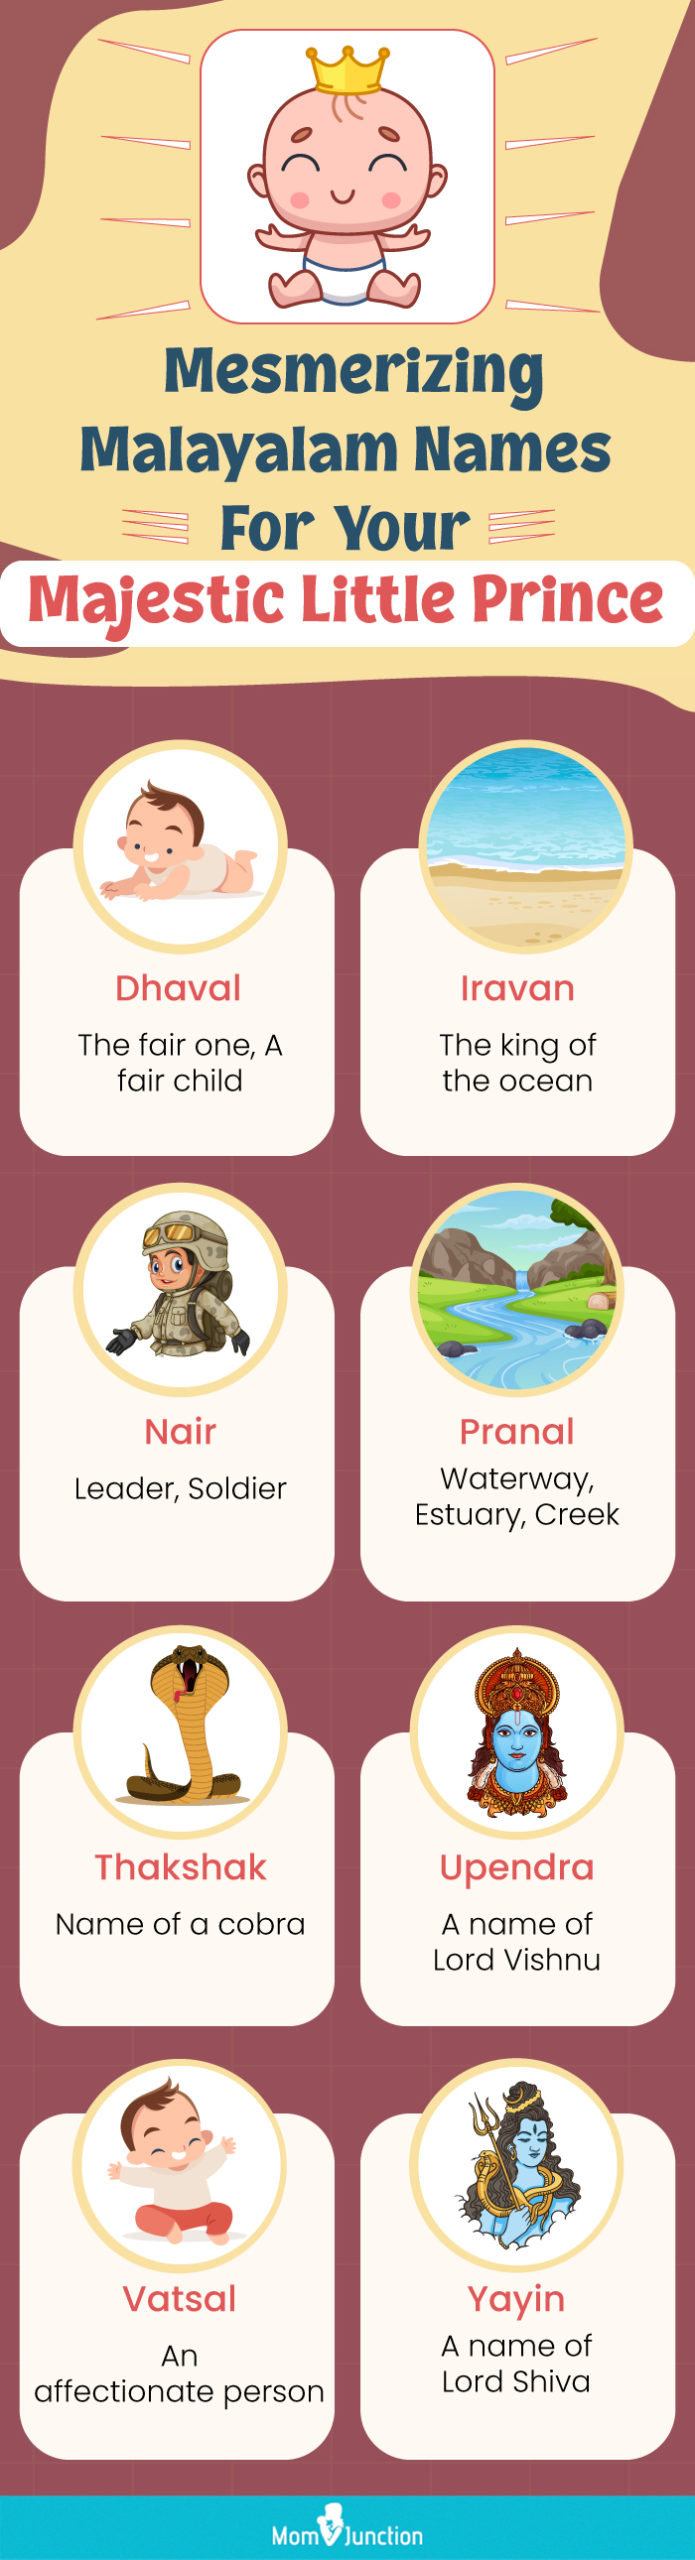 malayalam baby boy names with meanings (infographic)